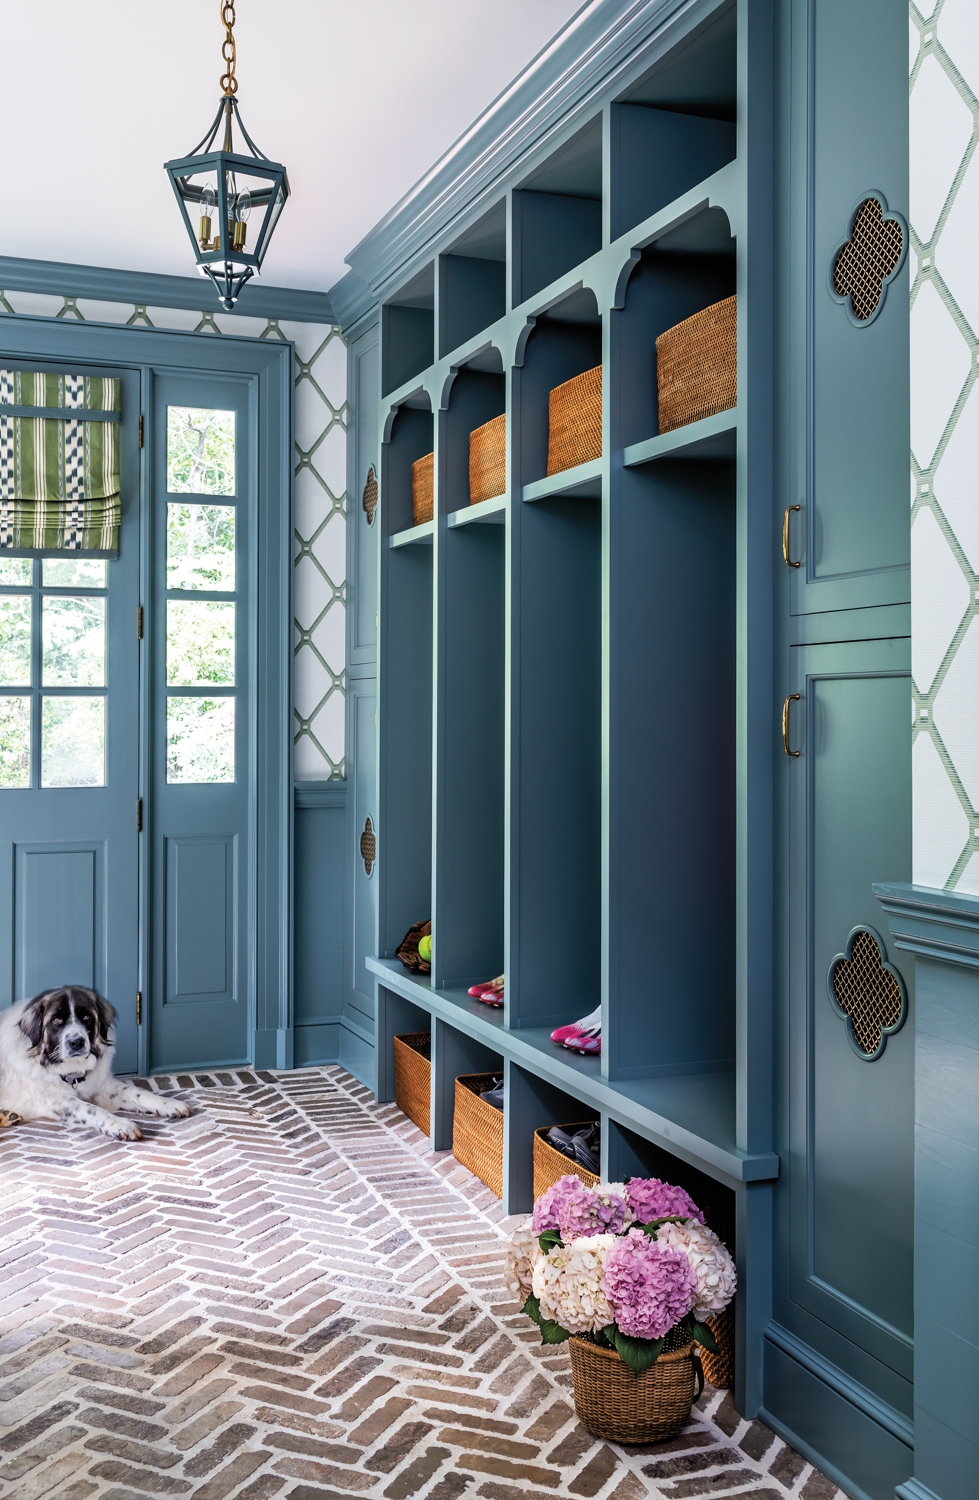 Mudroom with blue cabinetry, diamond-patterned...